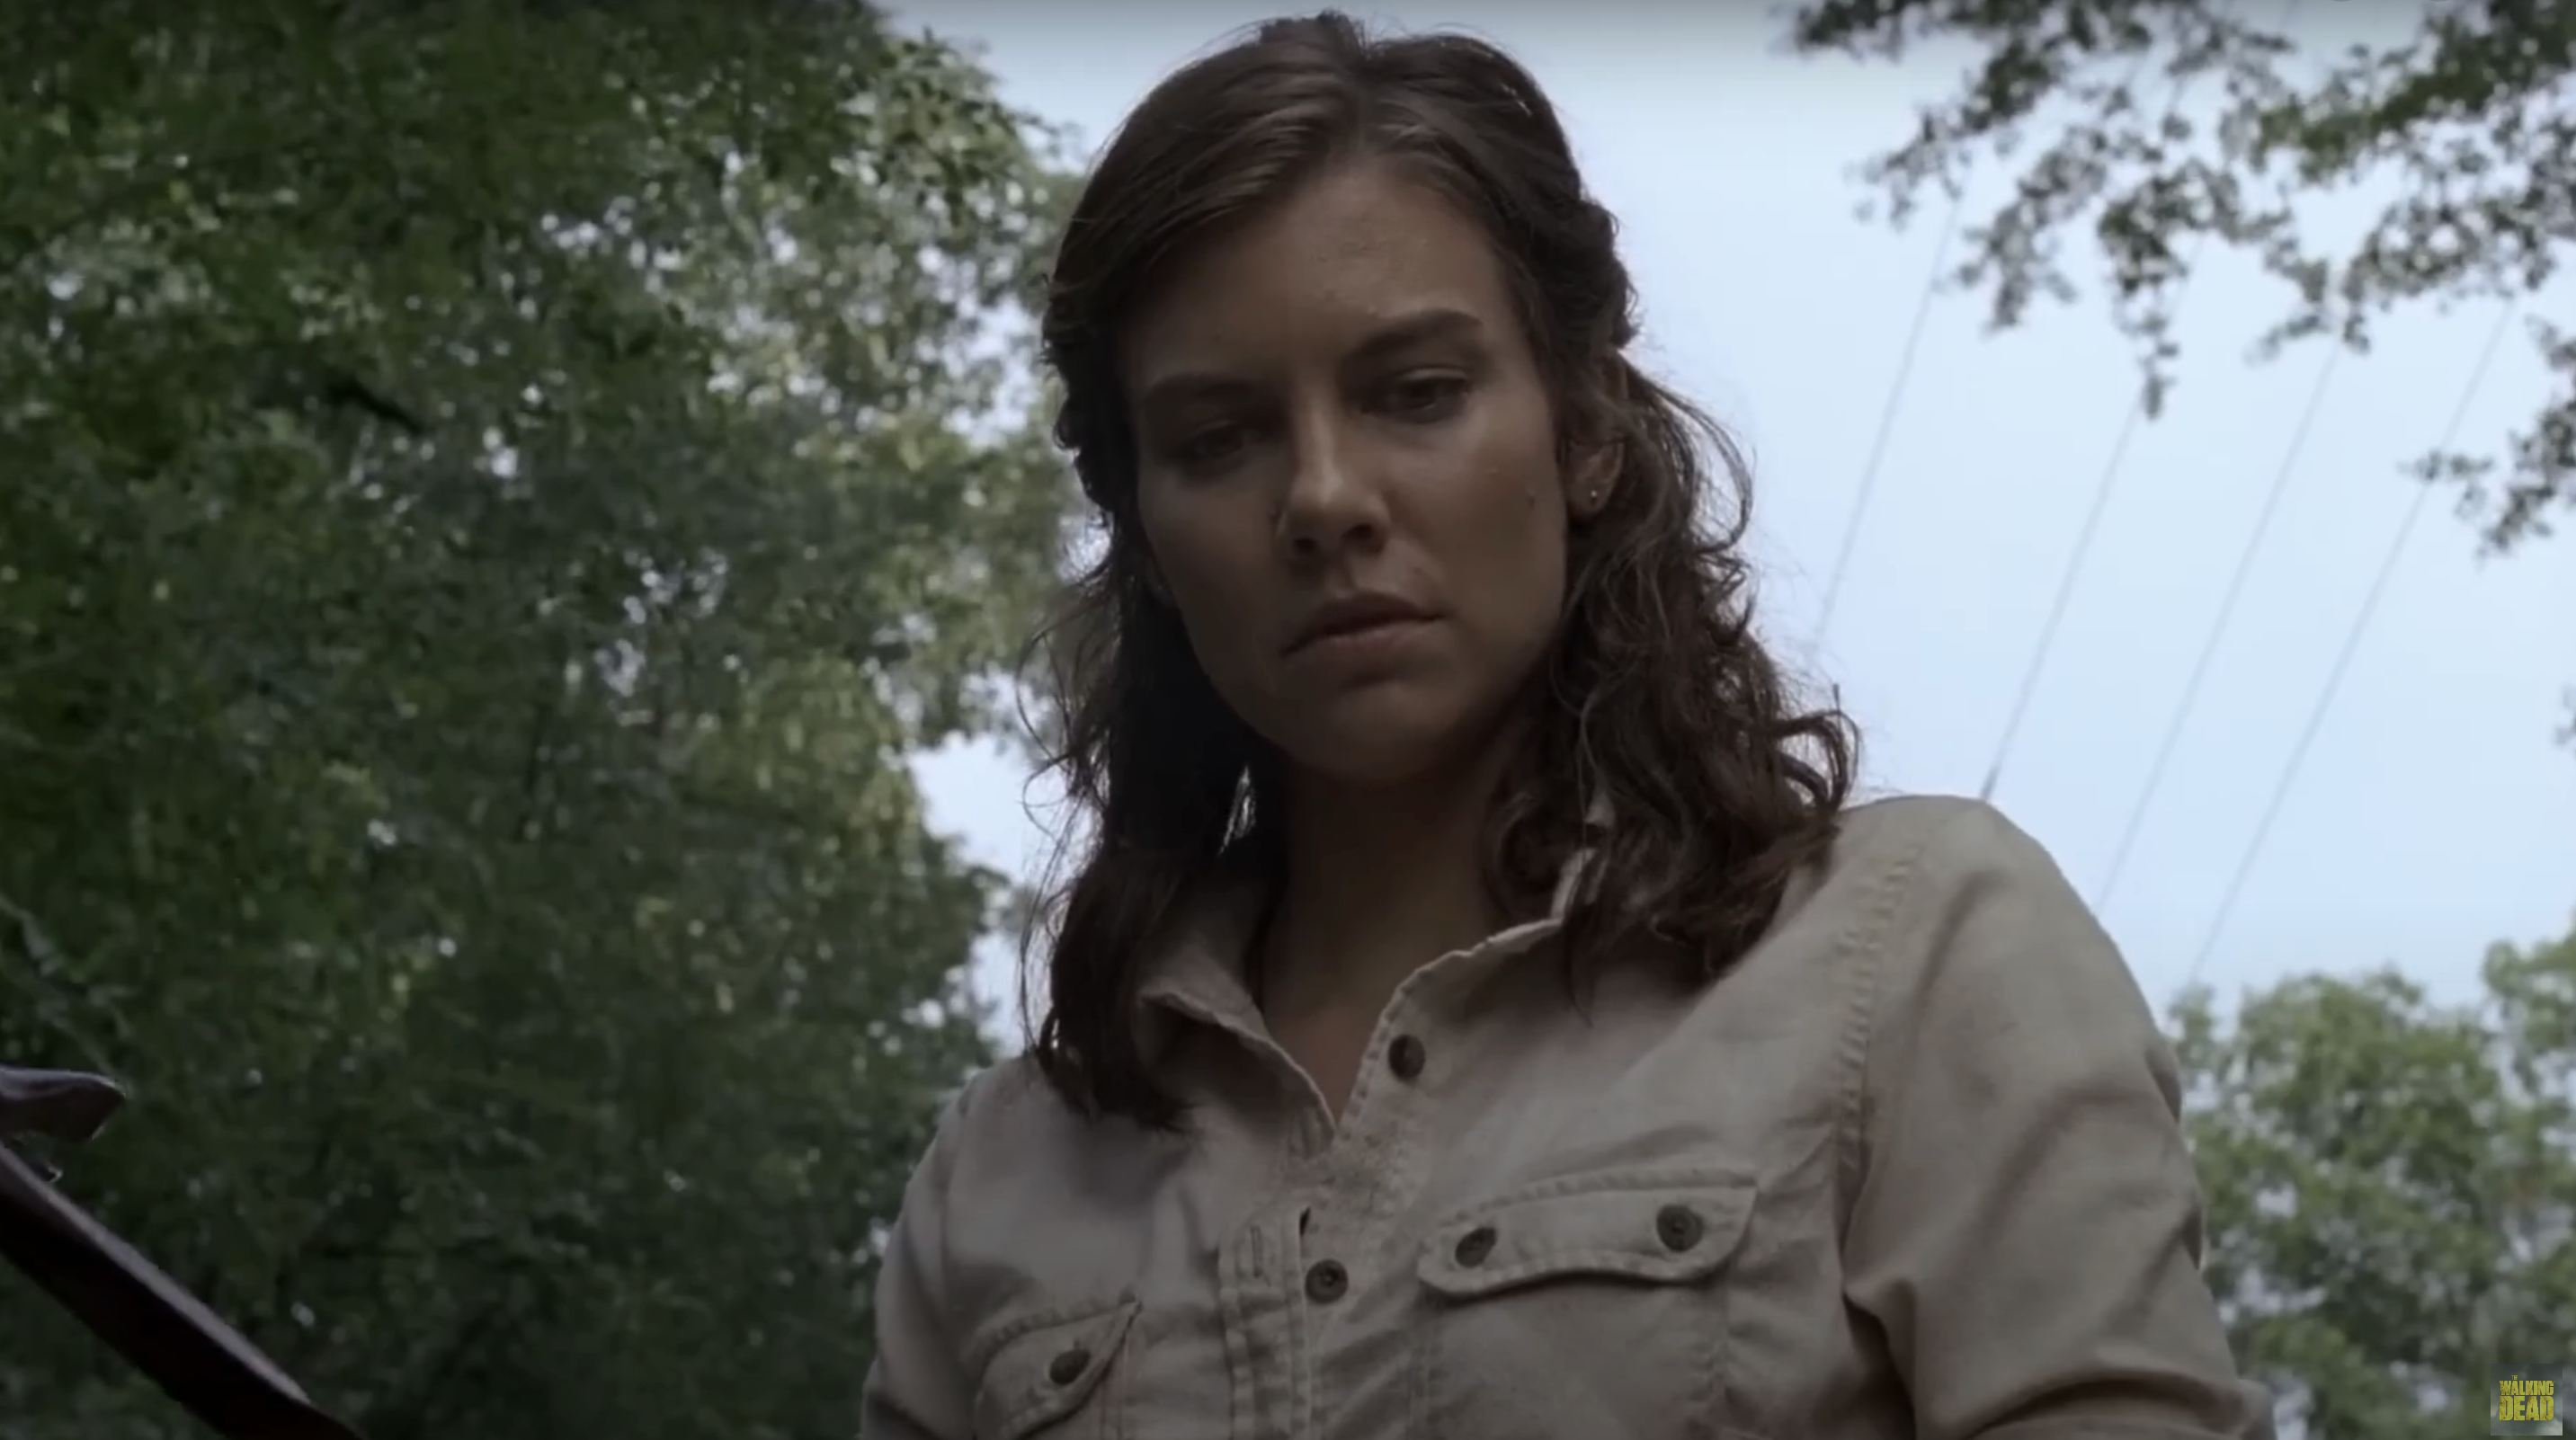 Lauren Cohan in a forest looking down with a serious expression. She wears a buttoned-up shirt